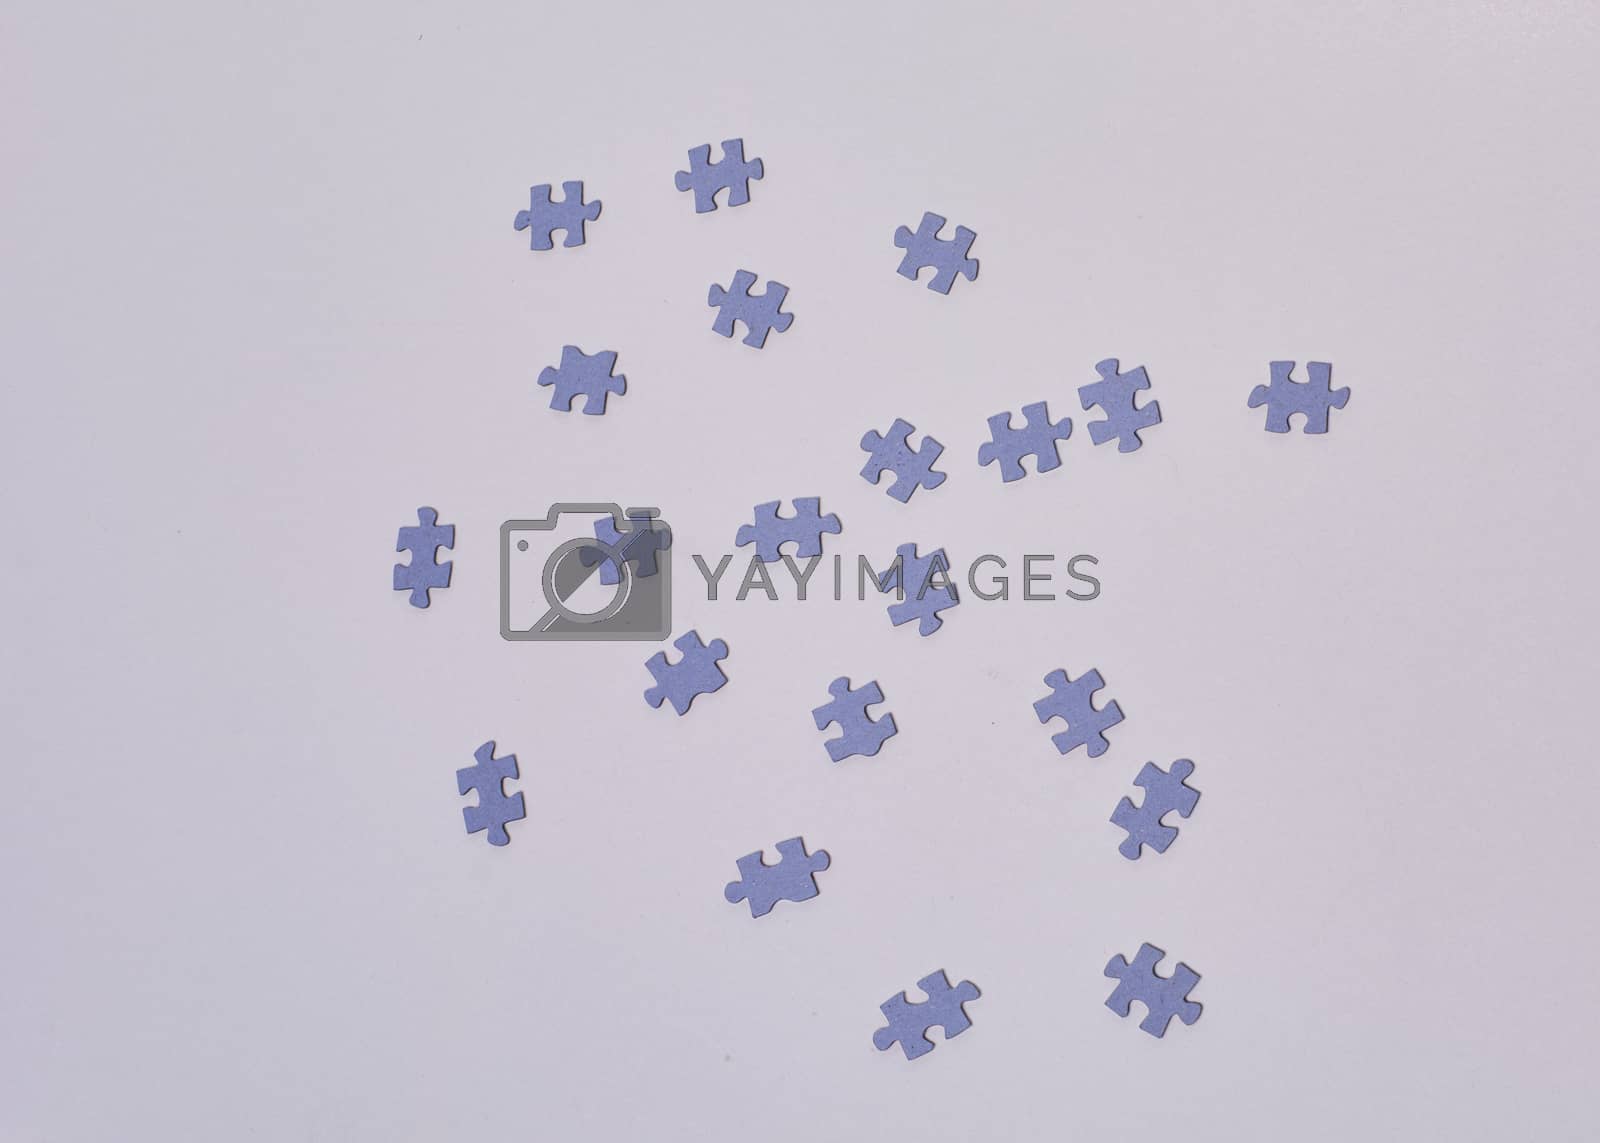 Royalty free image of Puzzle pieces on white background, Covid-19 by raul_ruiz